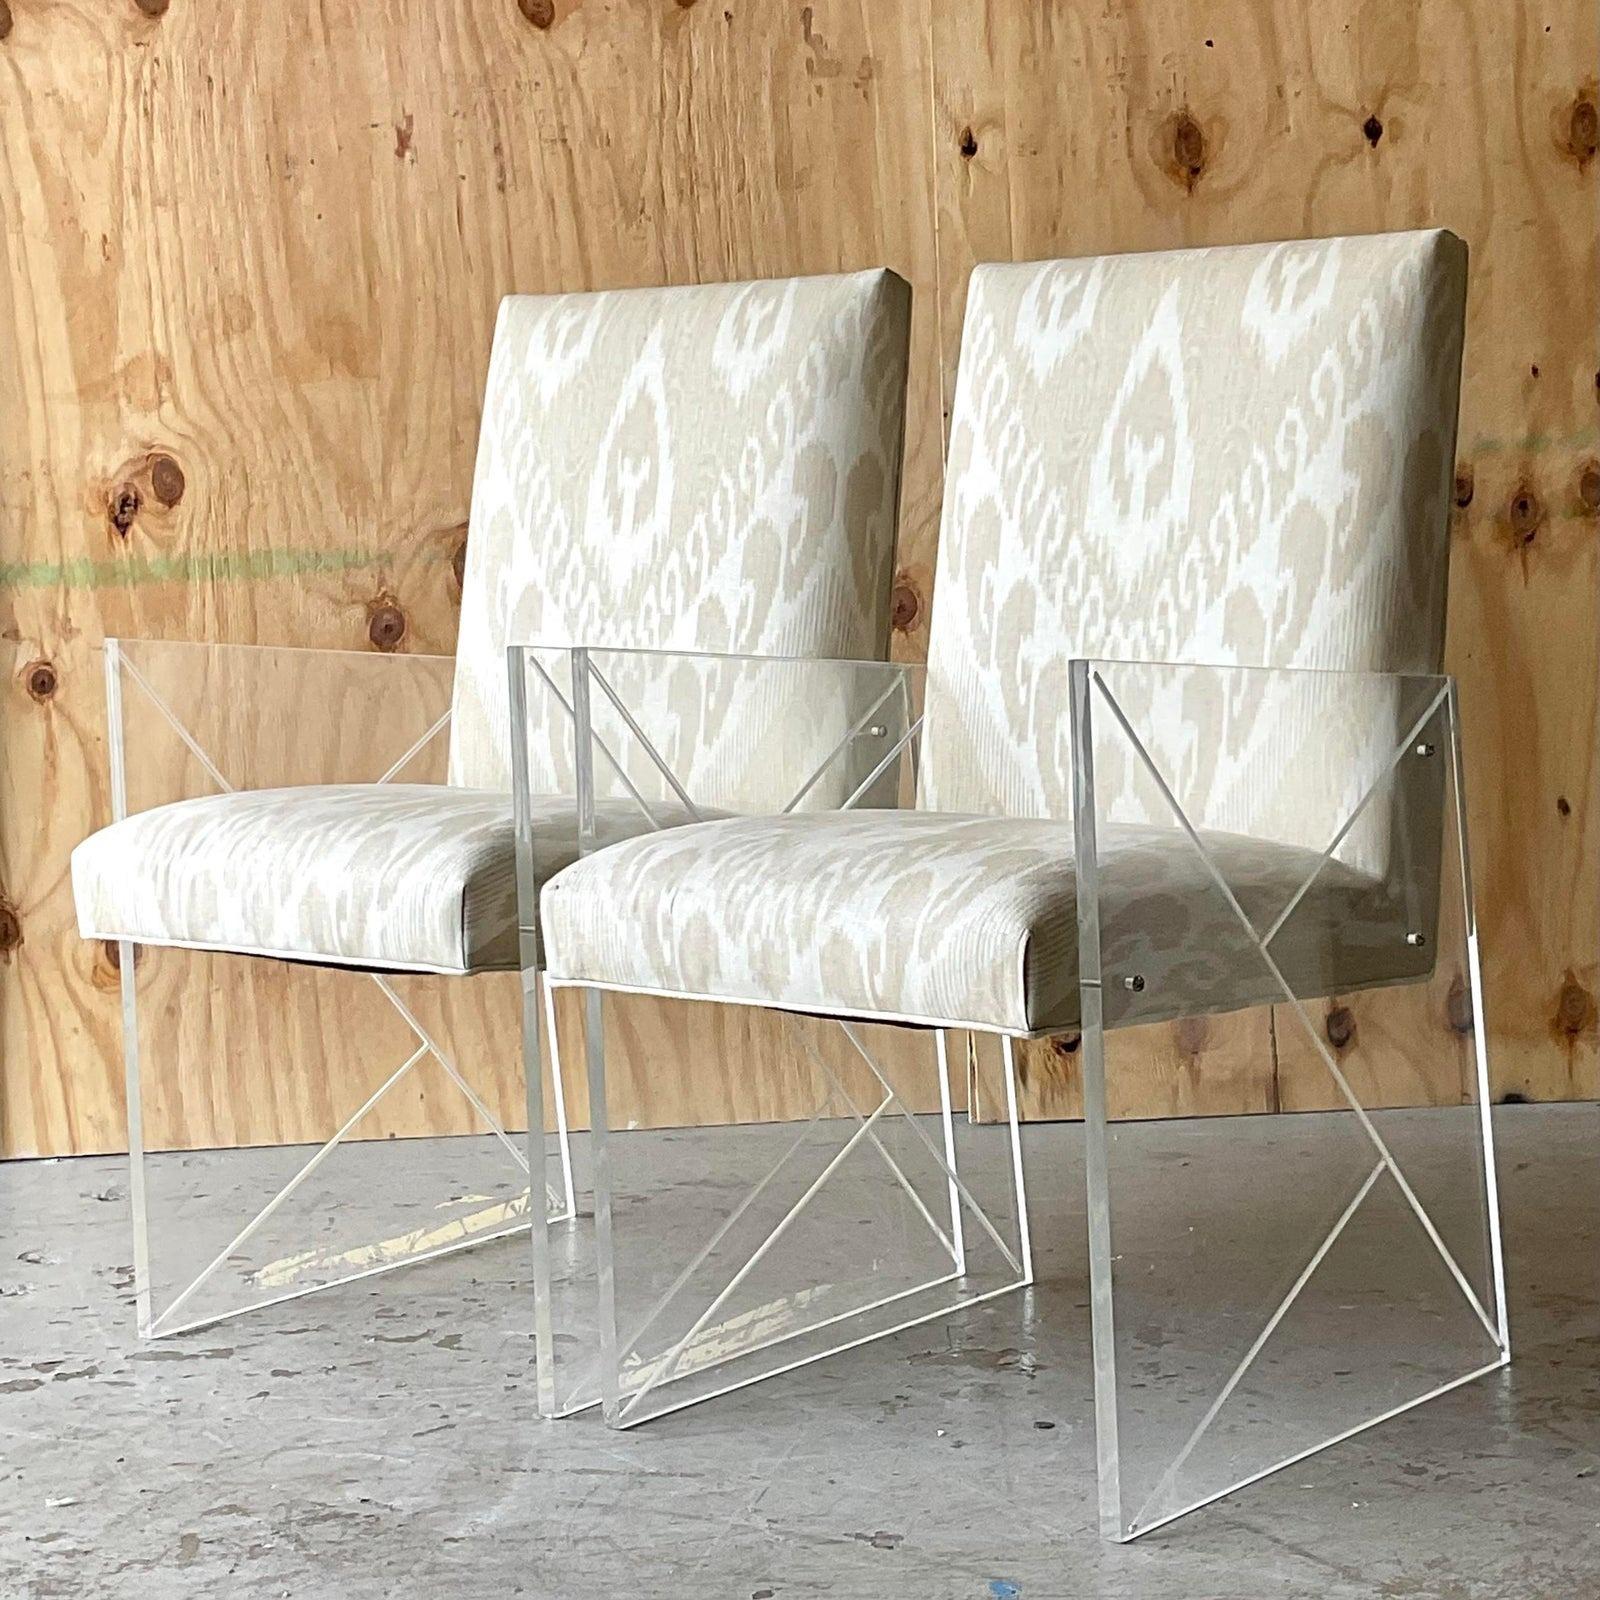 Mid-20th Century Vintage Boho French 60s Lucite Host Chairs in Thibaut Ikat - a Pair For Sale